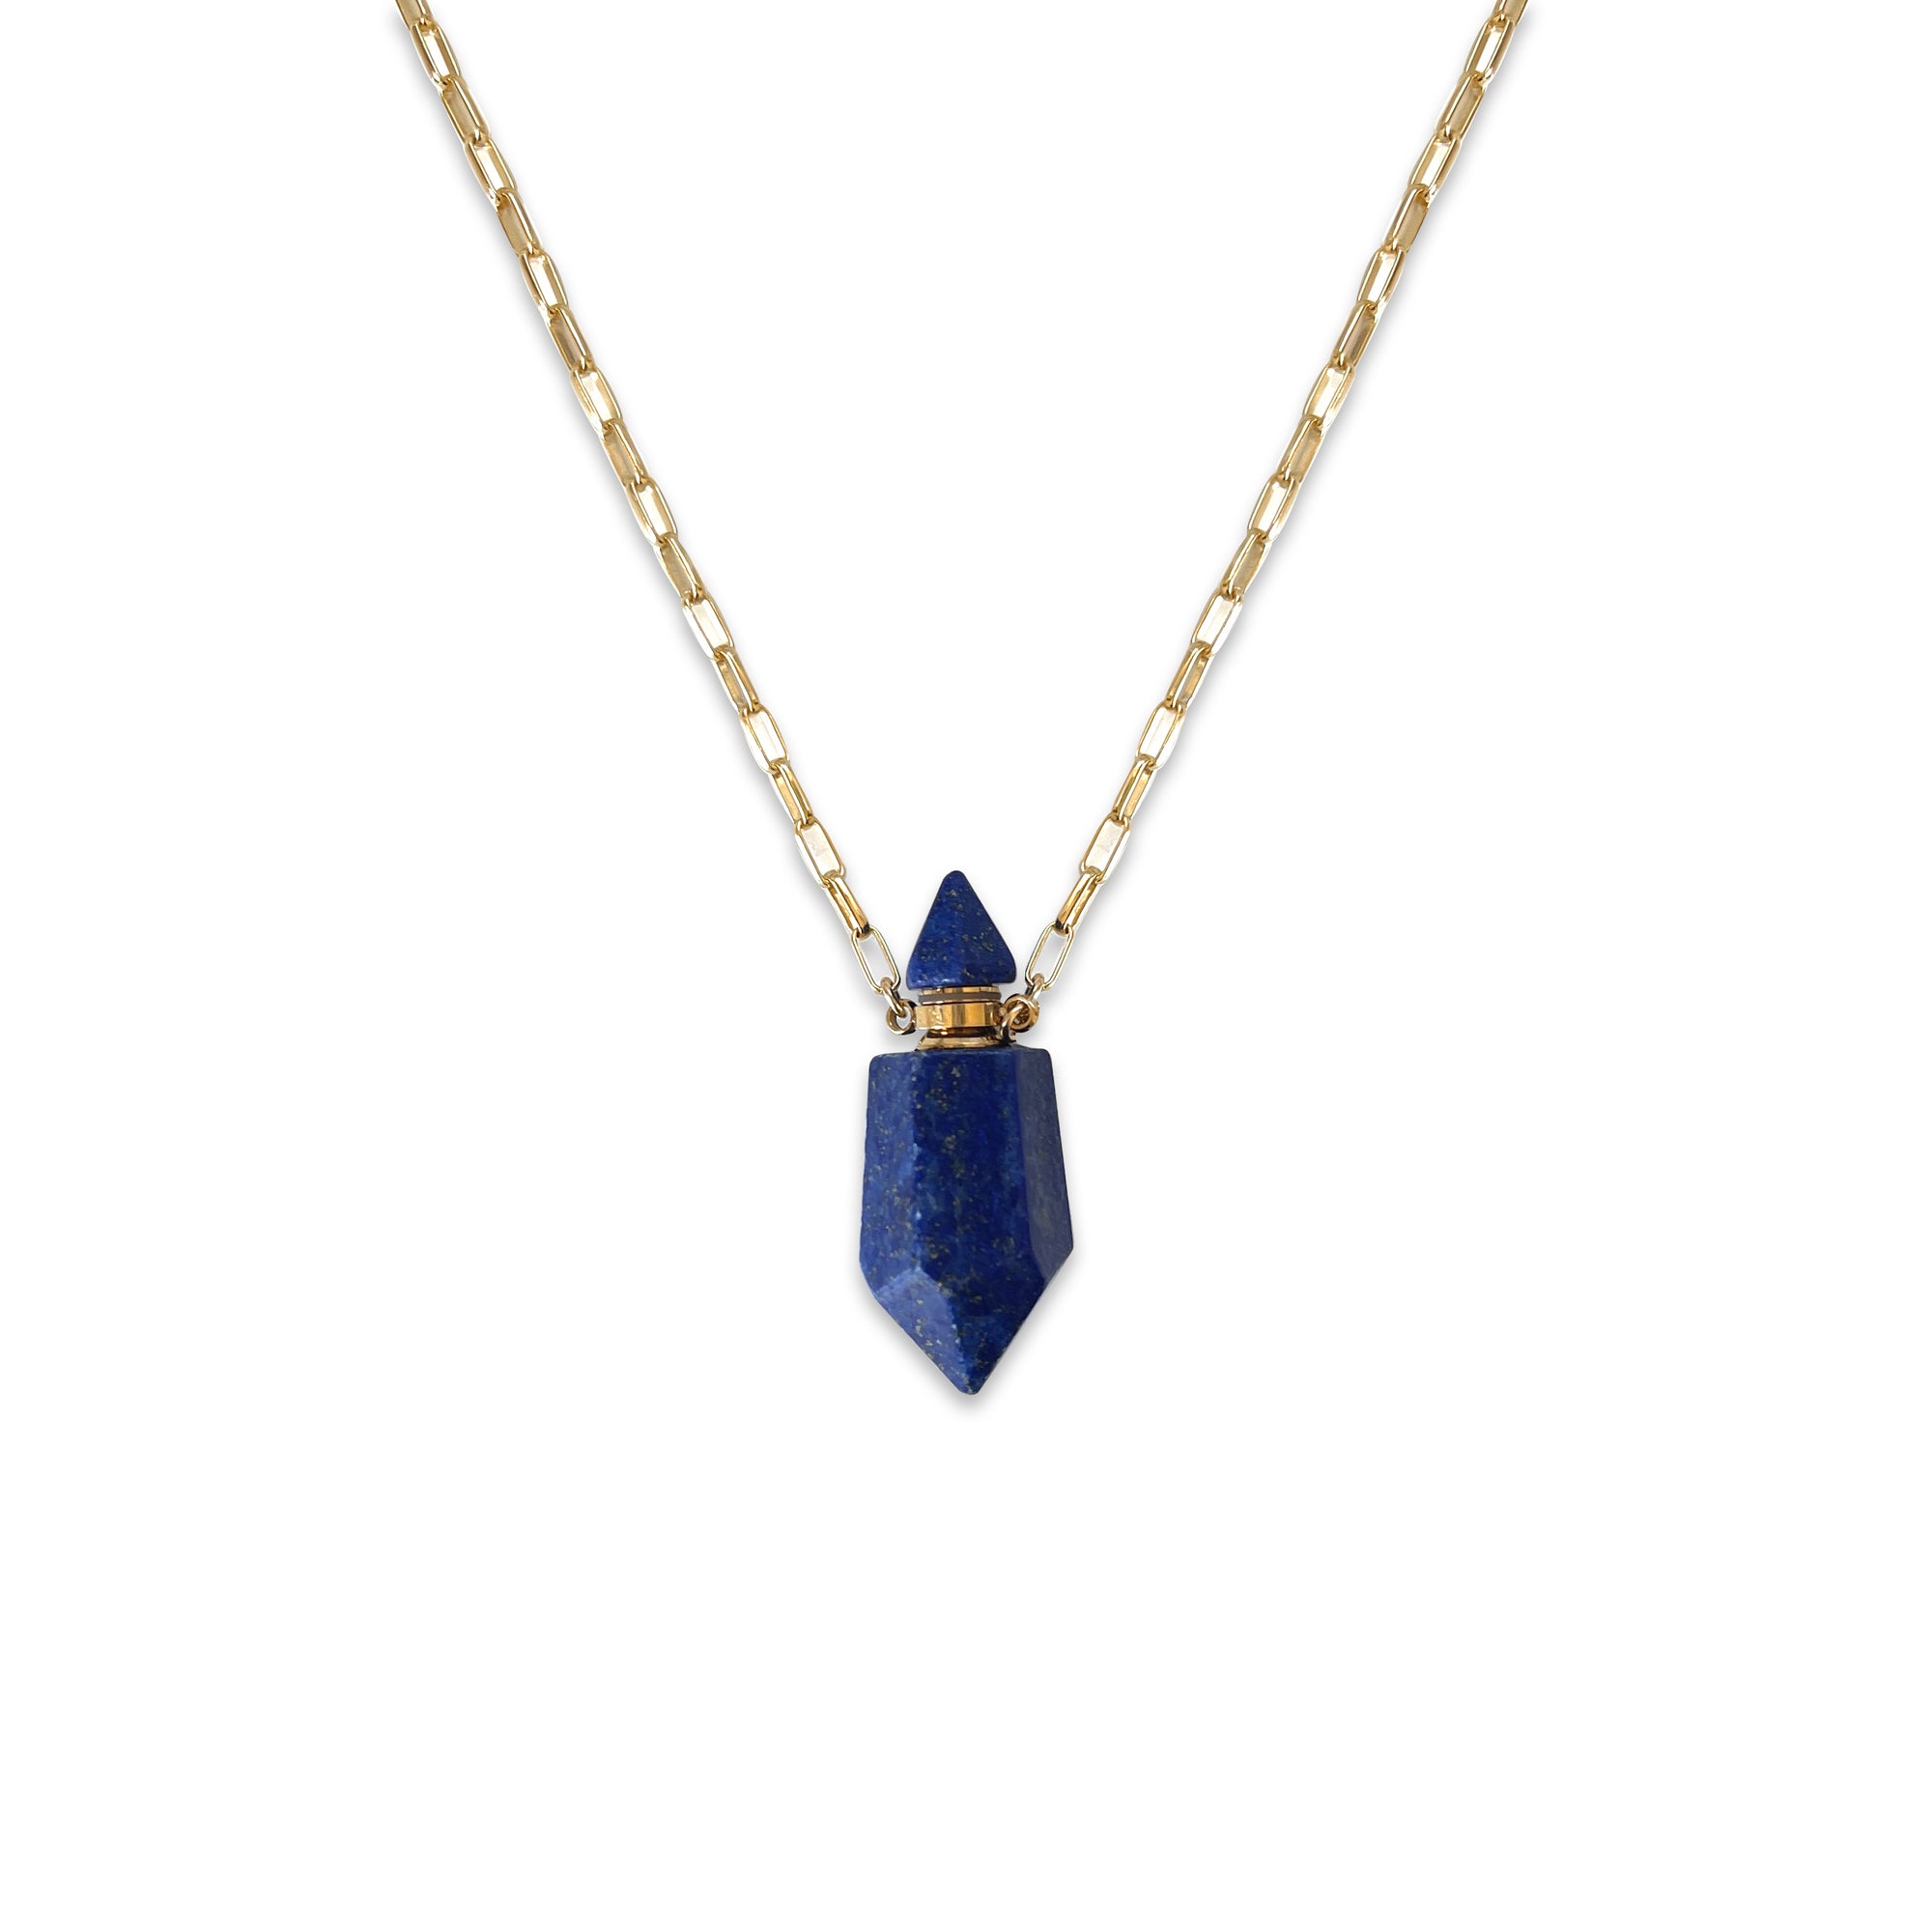 Phoenix Necklace in Lapis Erin Fader Jewelry